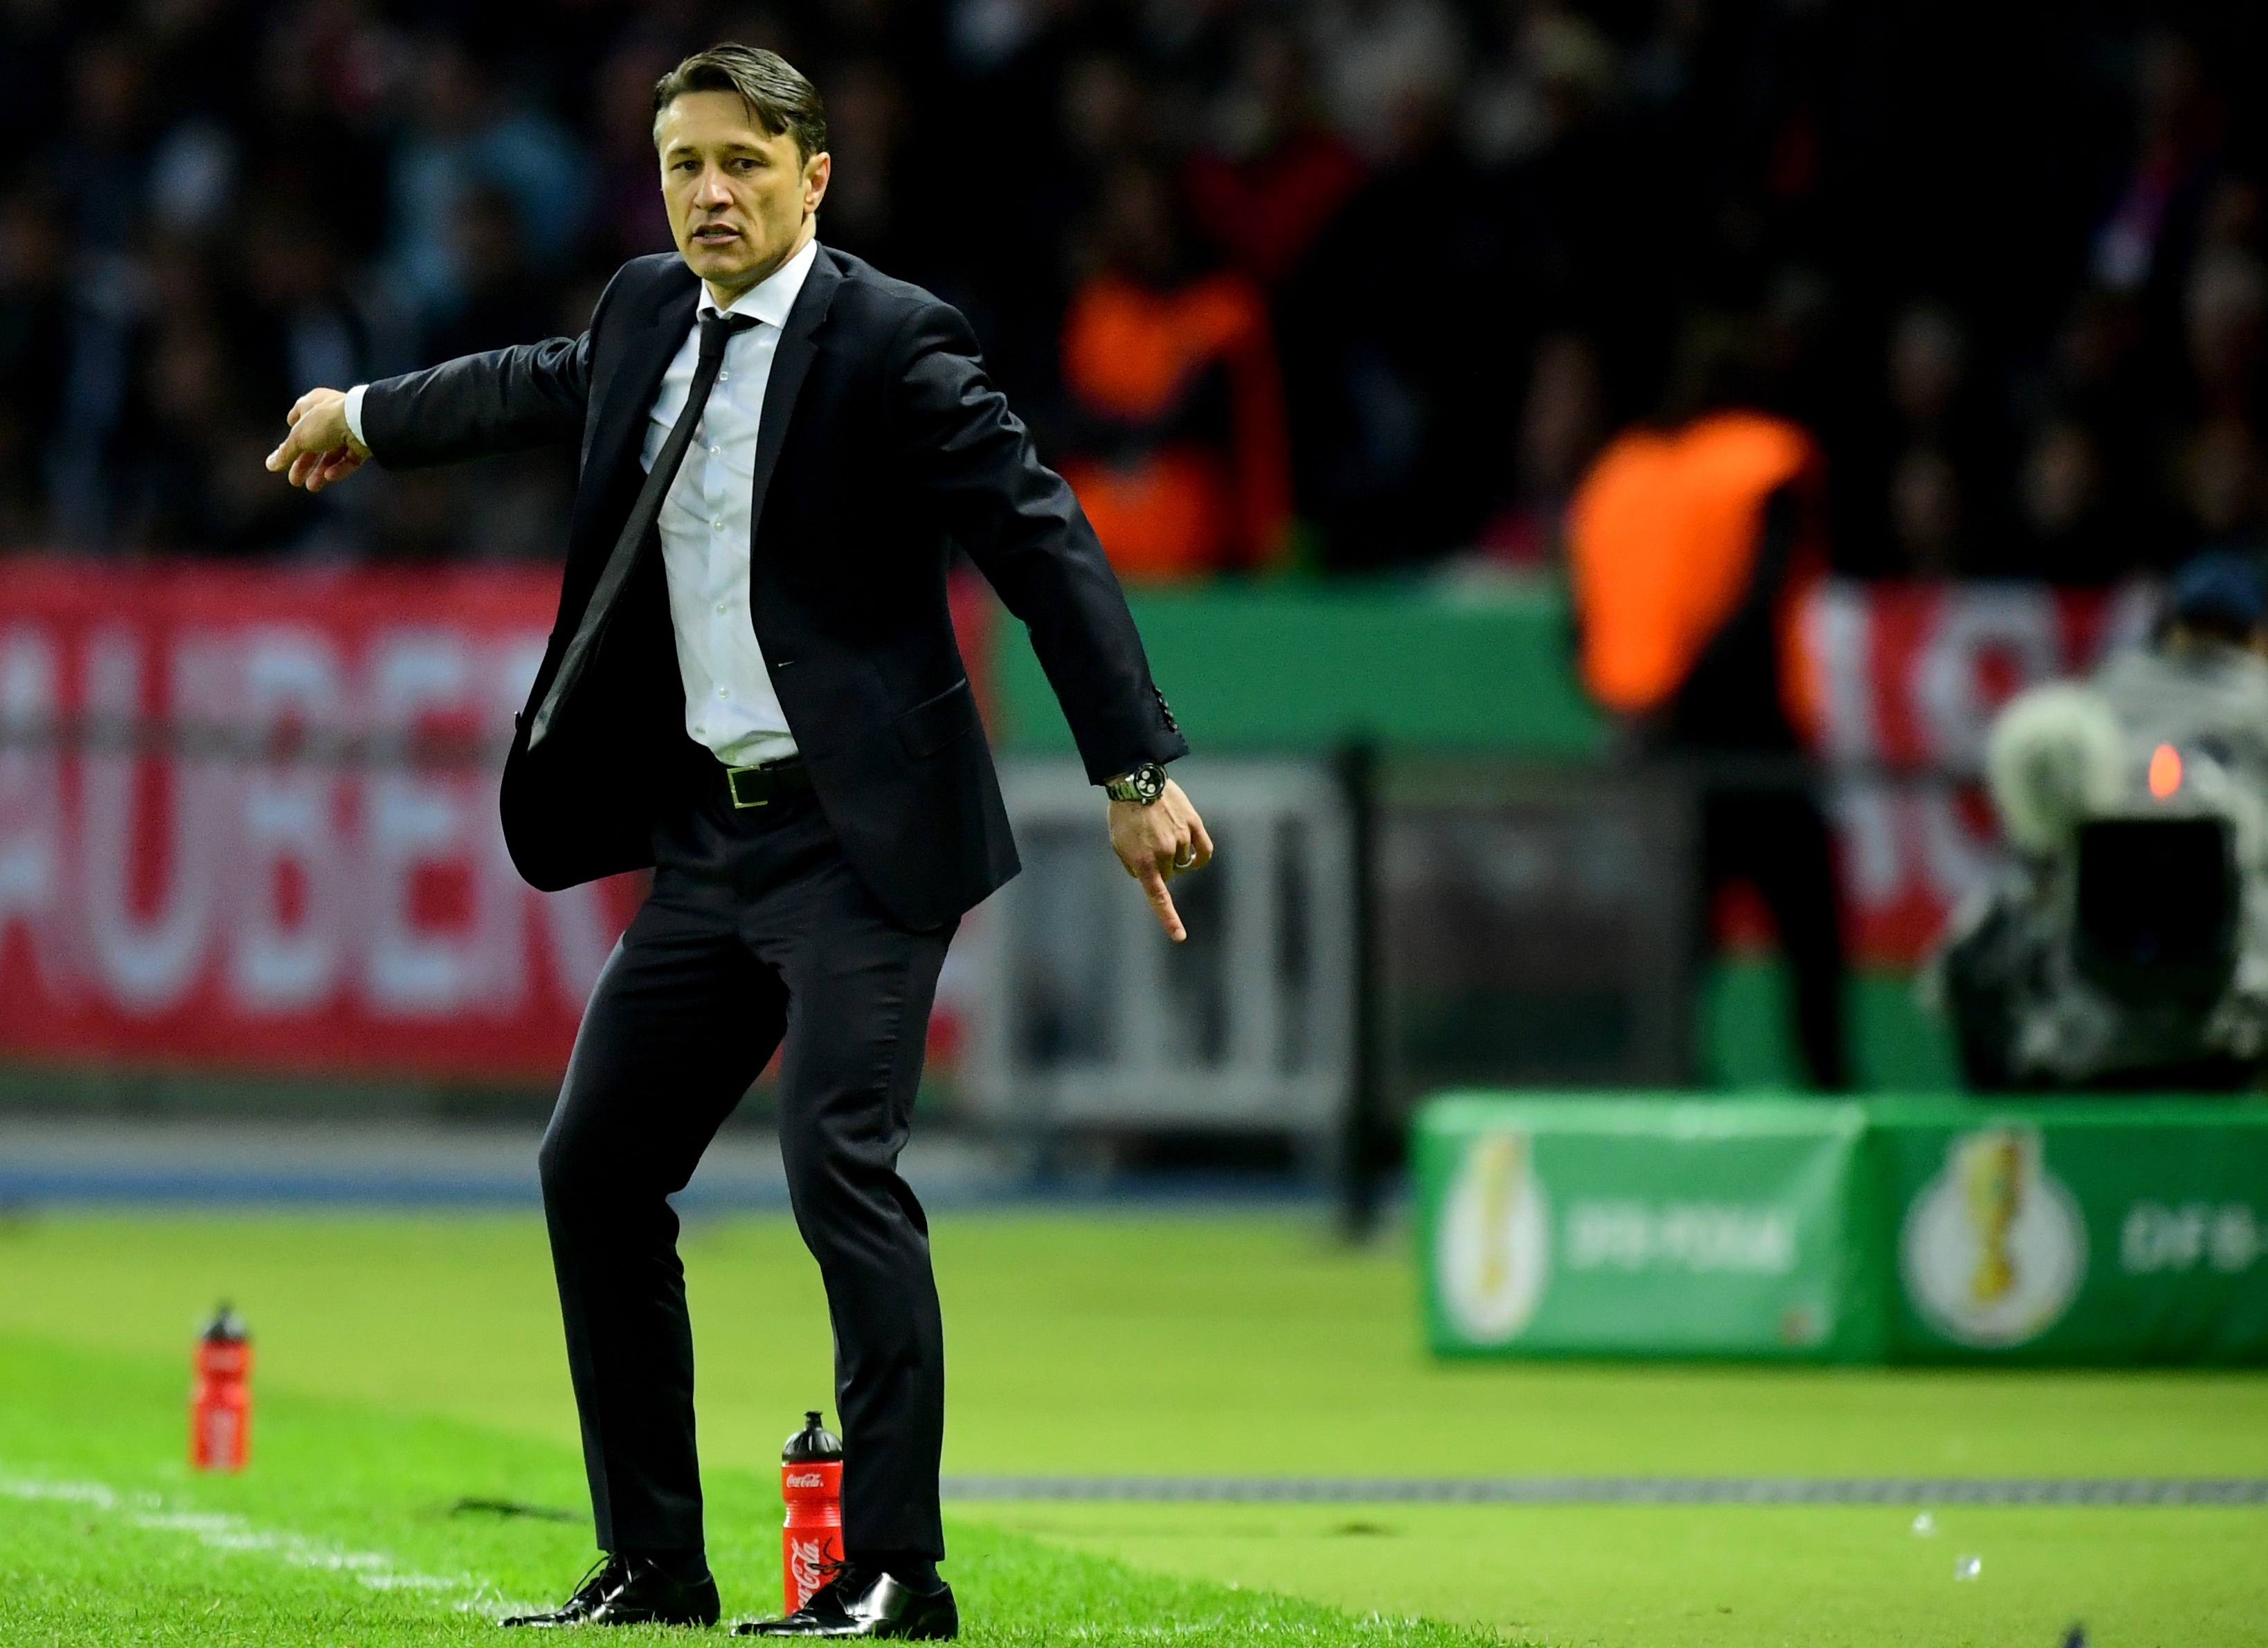 epa07600624 Bayern's head coach Niko Kovac gestures during the German DFB Cup final soccer match between RB Leipzig and FC Bayern Munich in Berlin, Germany, 25 May 2019.  EPA/CLEMENS BILAN CONDITIONS - ATTENTION: The DFB regulations prohibit any use of photographs as image sequences and/or quasi-video.